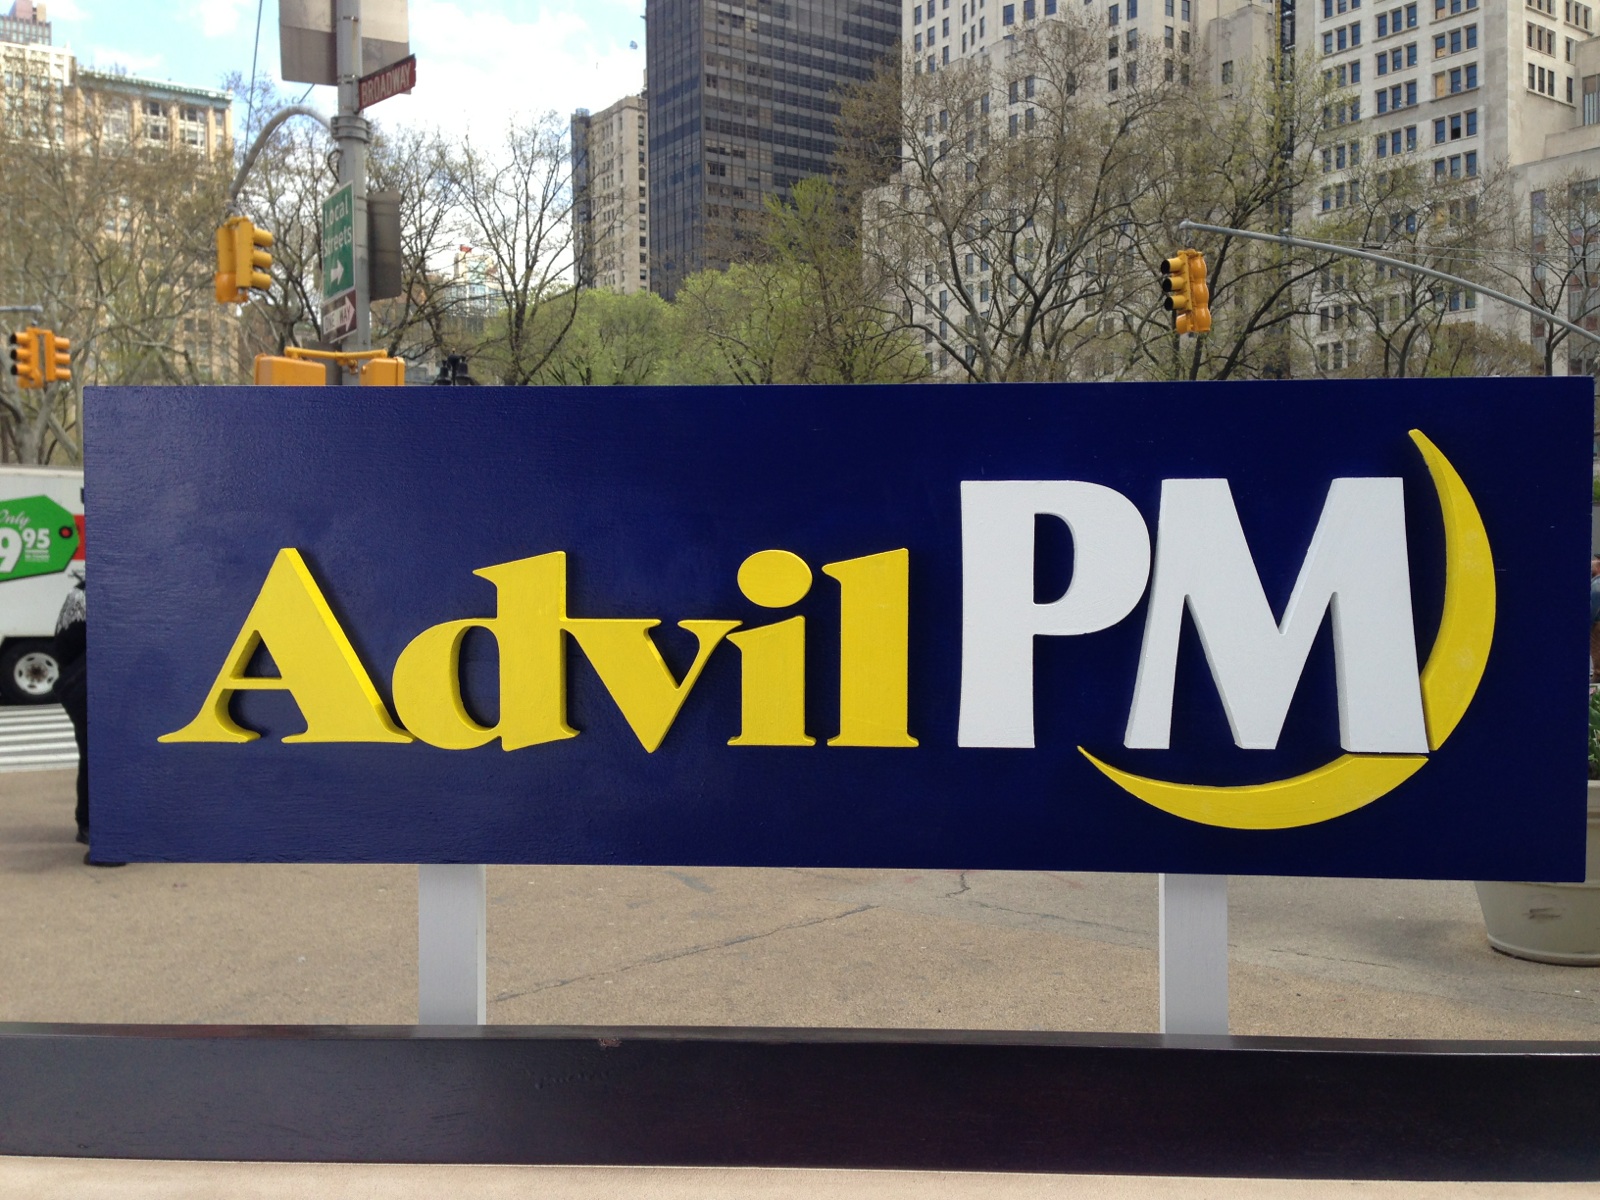 AdvilPM signage for commercial shoot